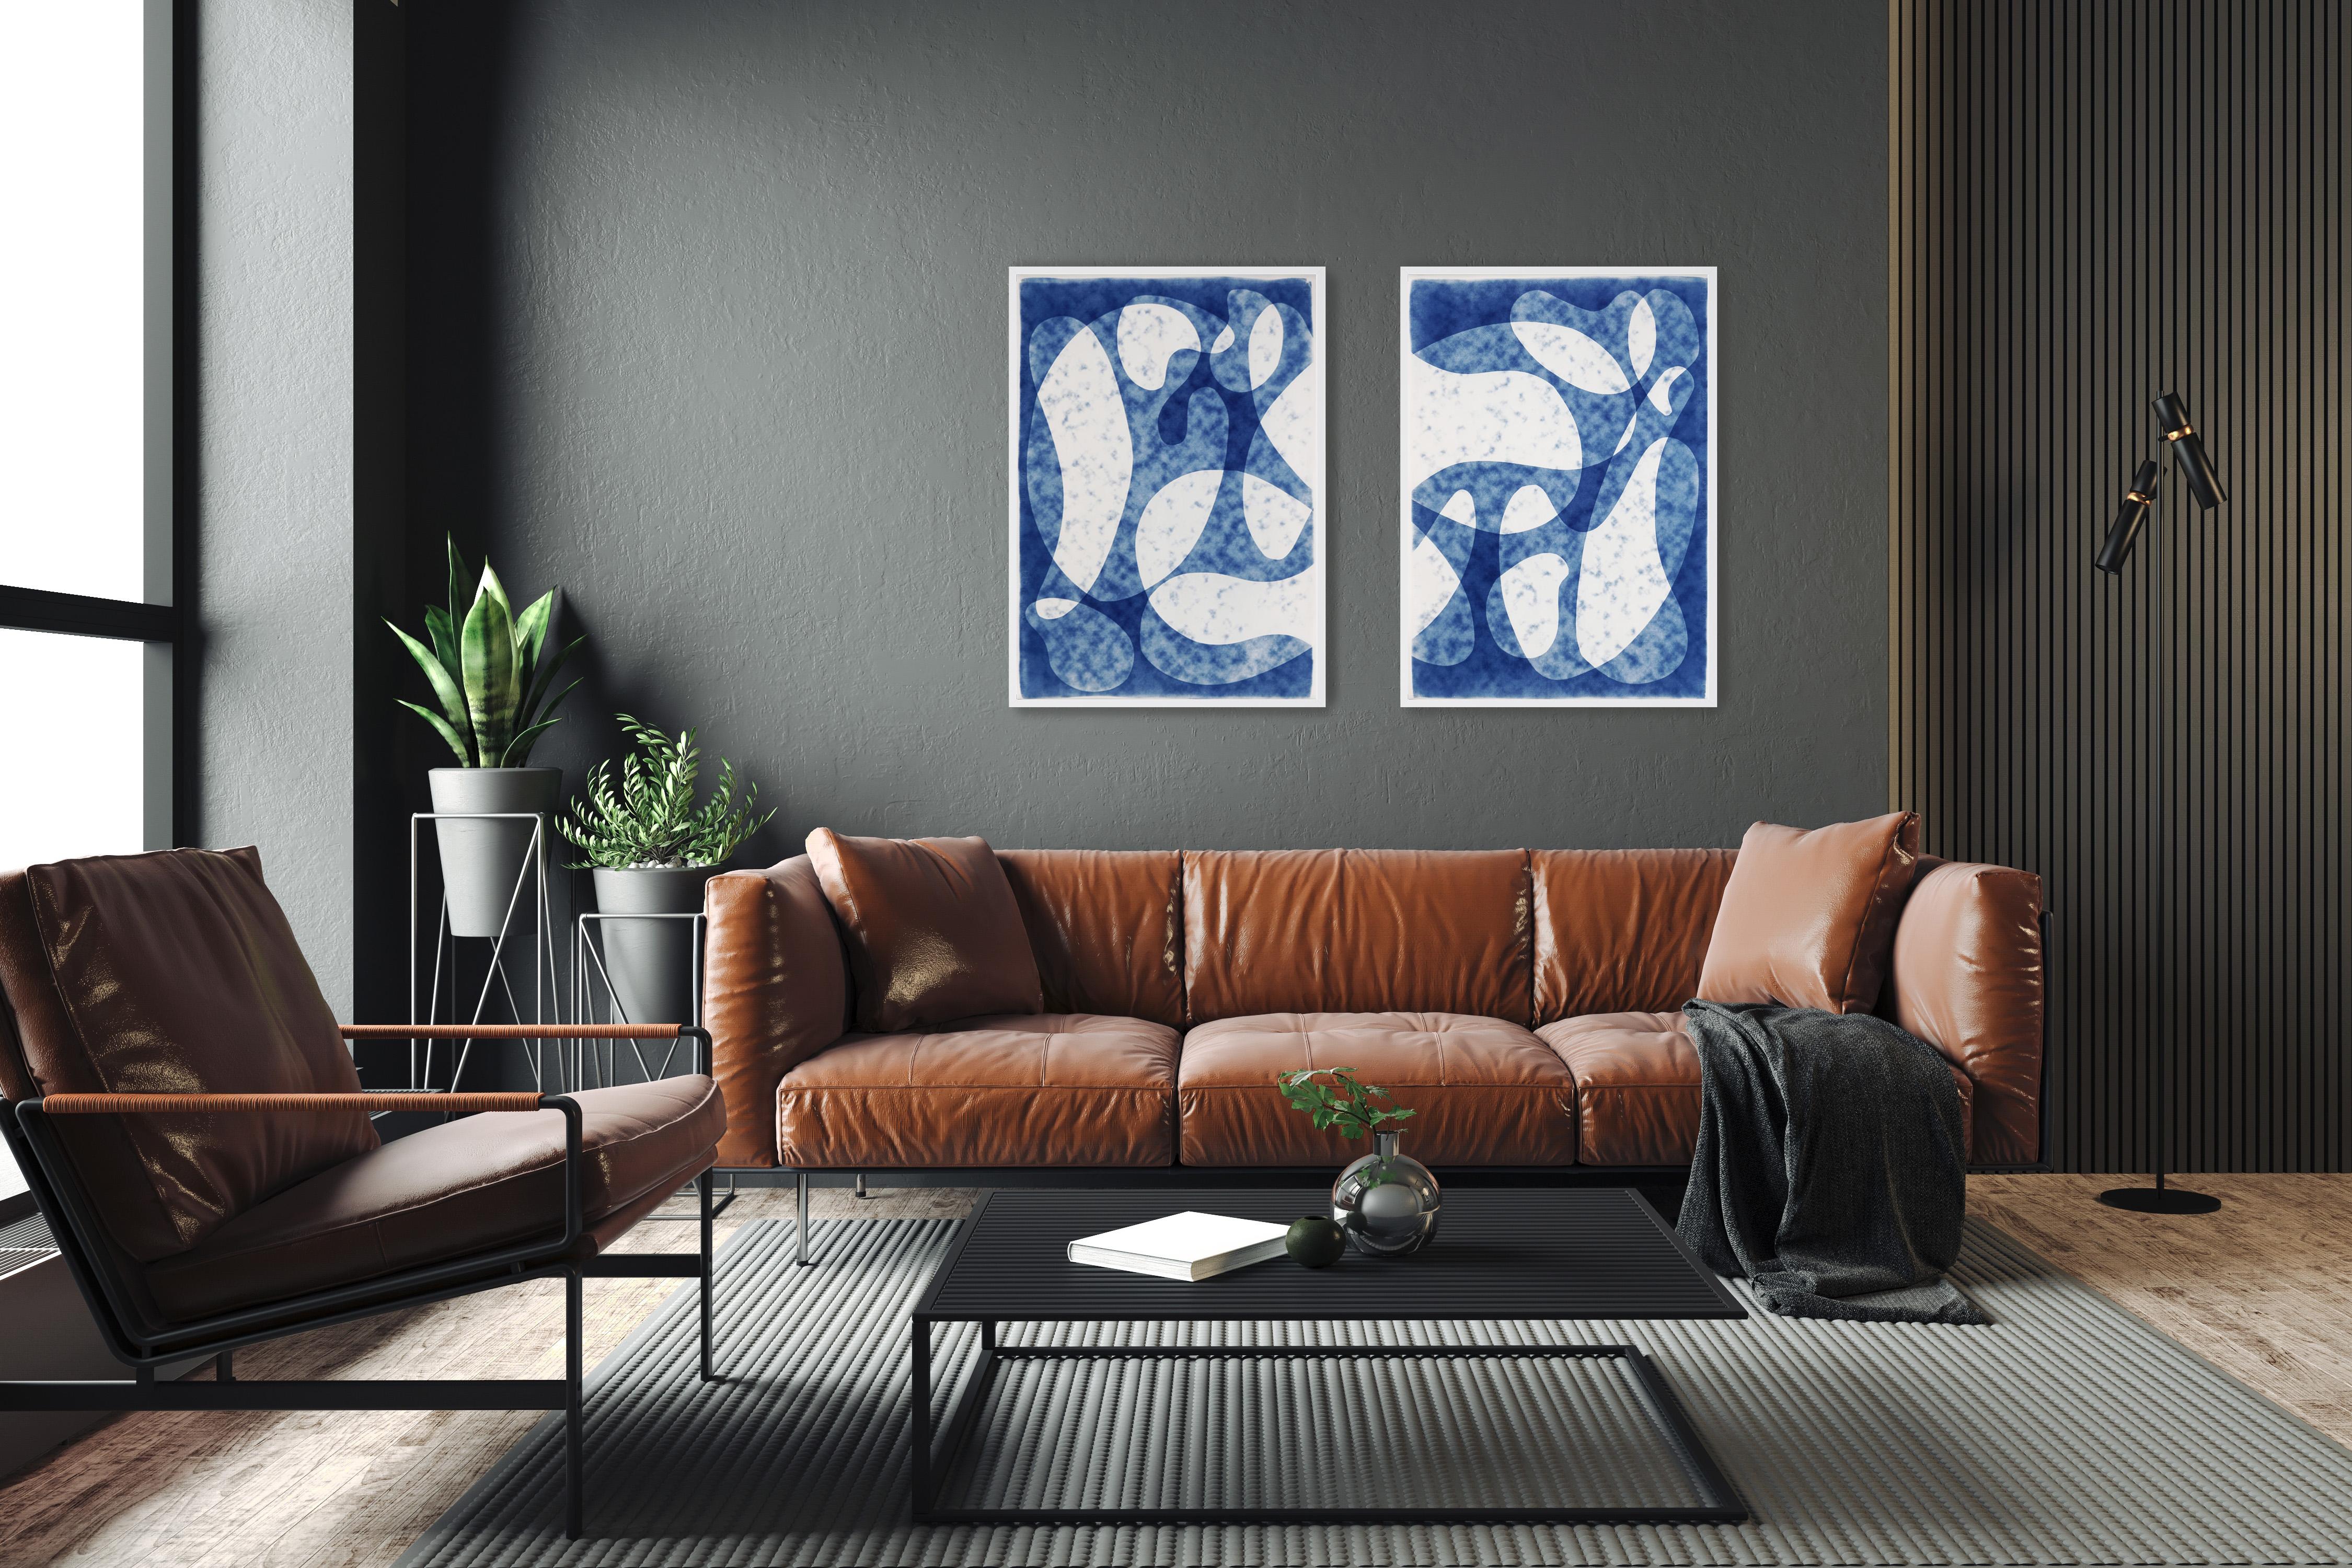 Modernism in The Clouds, Abstract Mid-Century Shapes, Blue & White Large Diptych 2